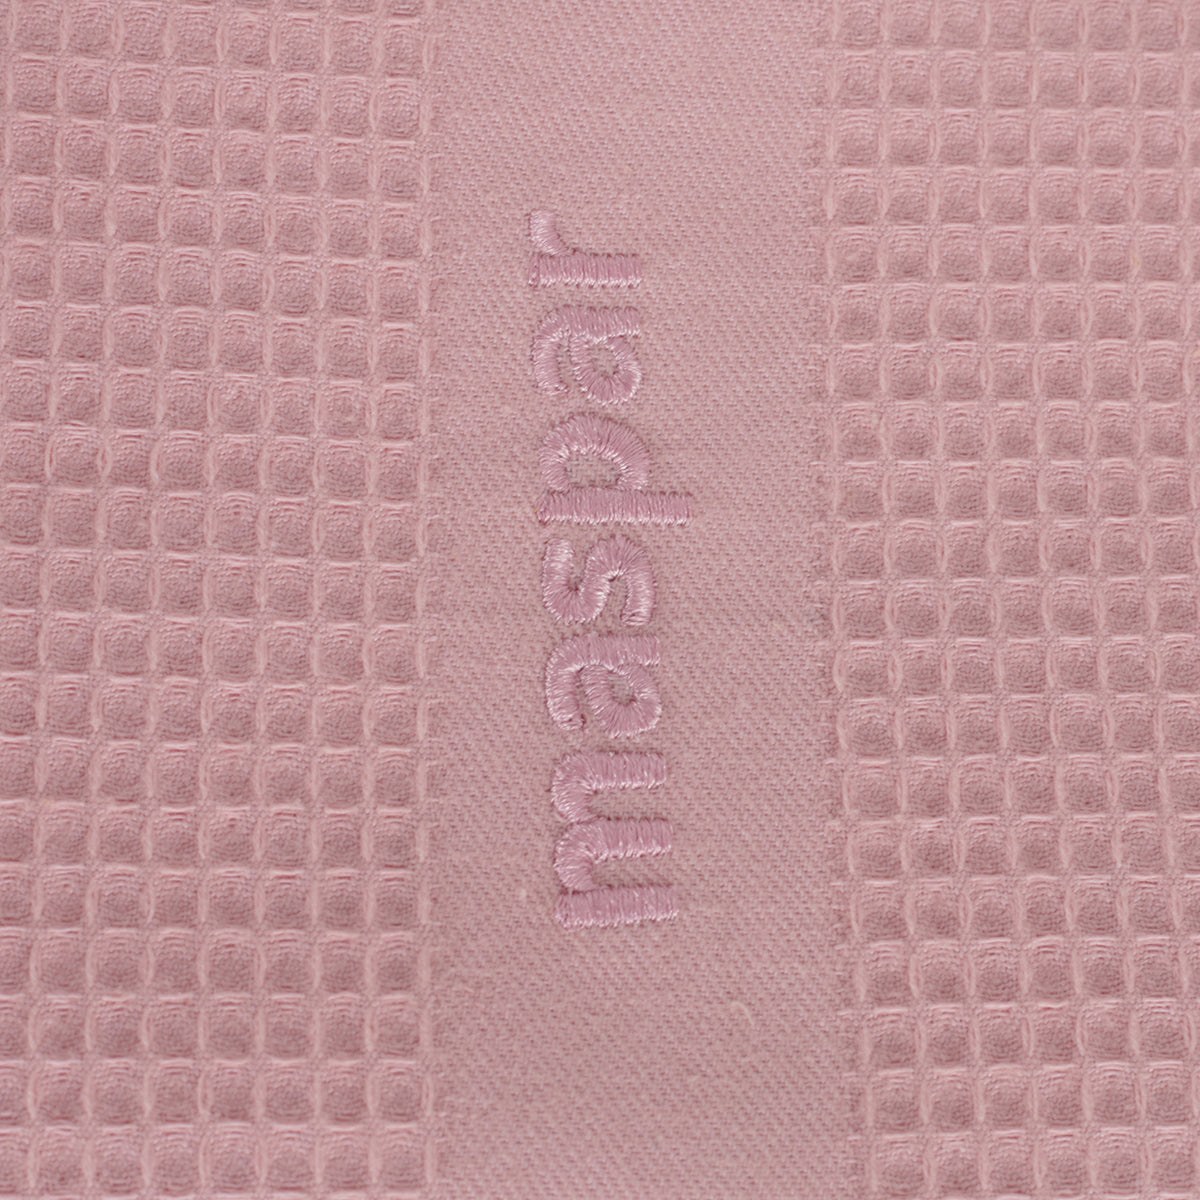 Catalina Waffle Antimicrobial Antifungal Super Absorbent Quick Dry Gym/Travel Bridal Rose Towel